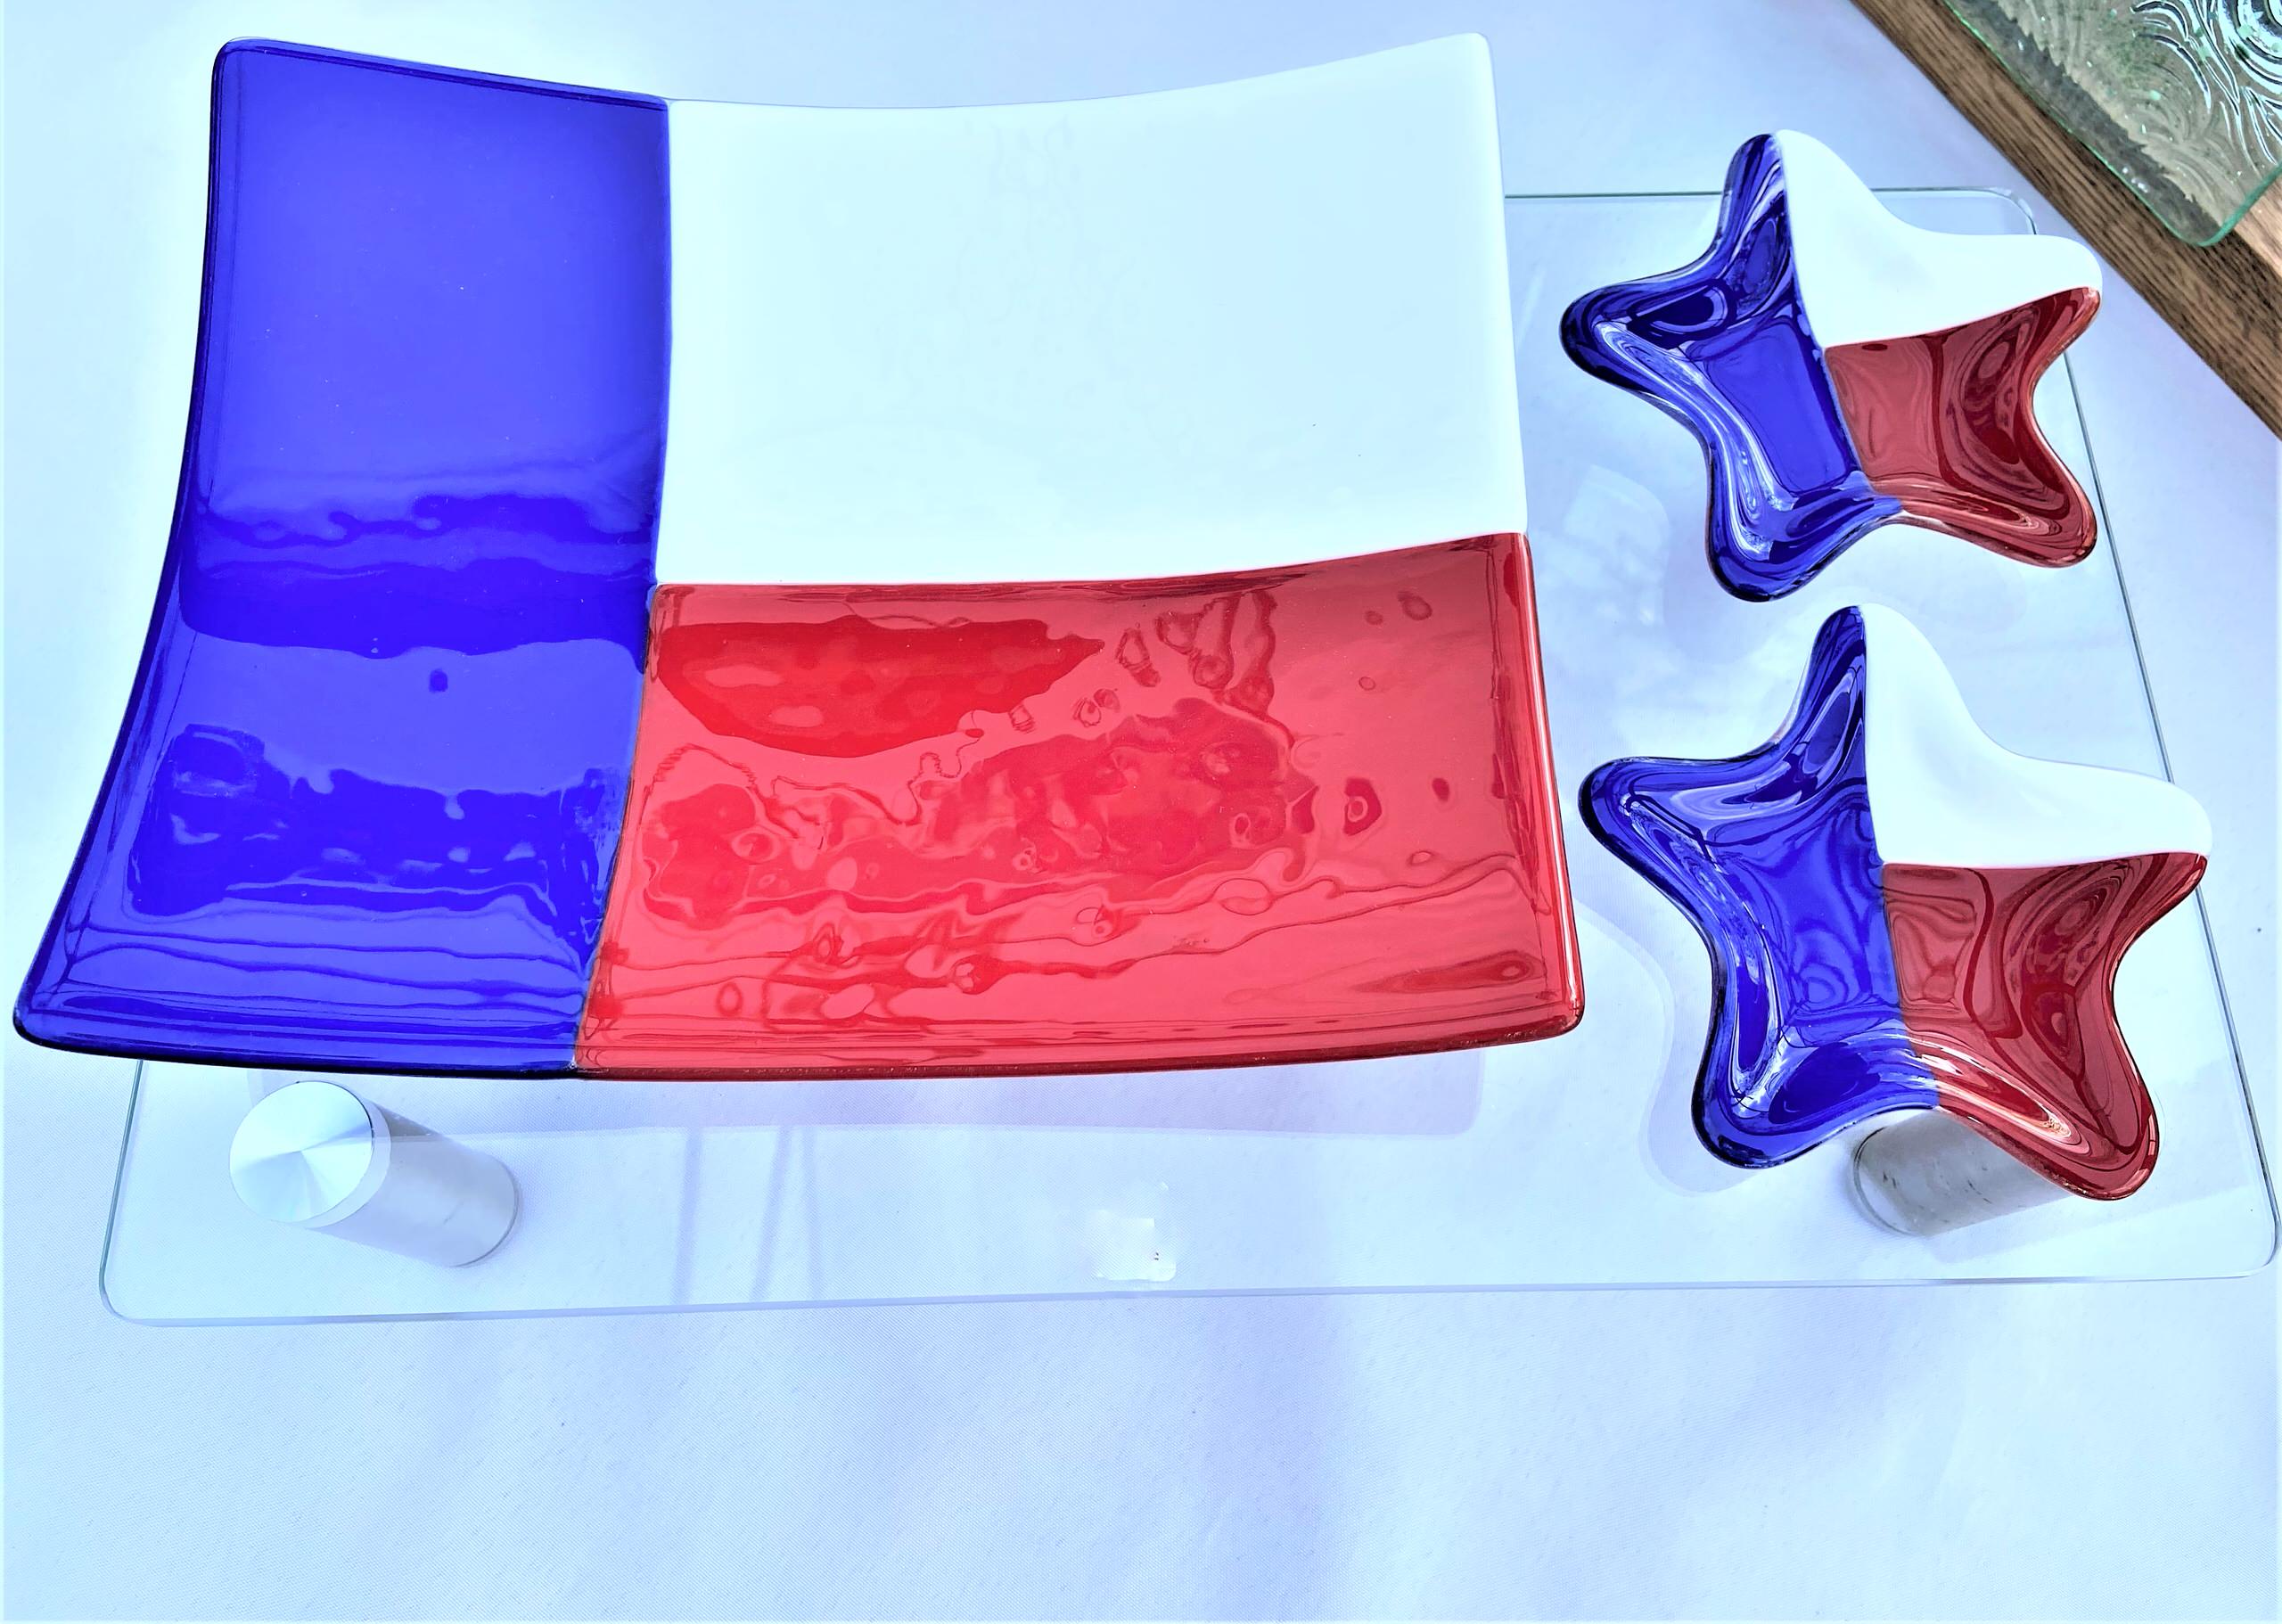 8" x 10" Large Texas Flag platter and 2 any-use 4.5" star plates - condiments, appetizer, desserts, candy, rings, keys, fobs